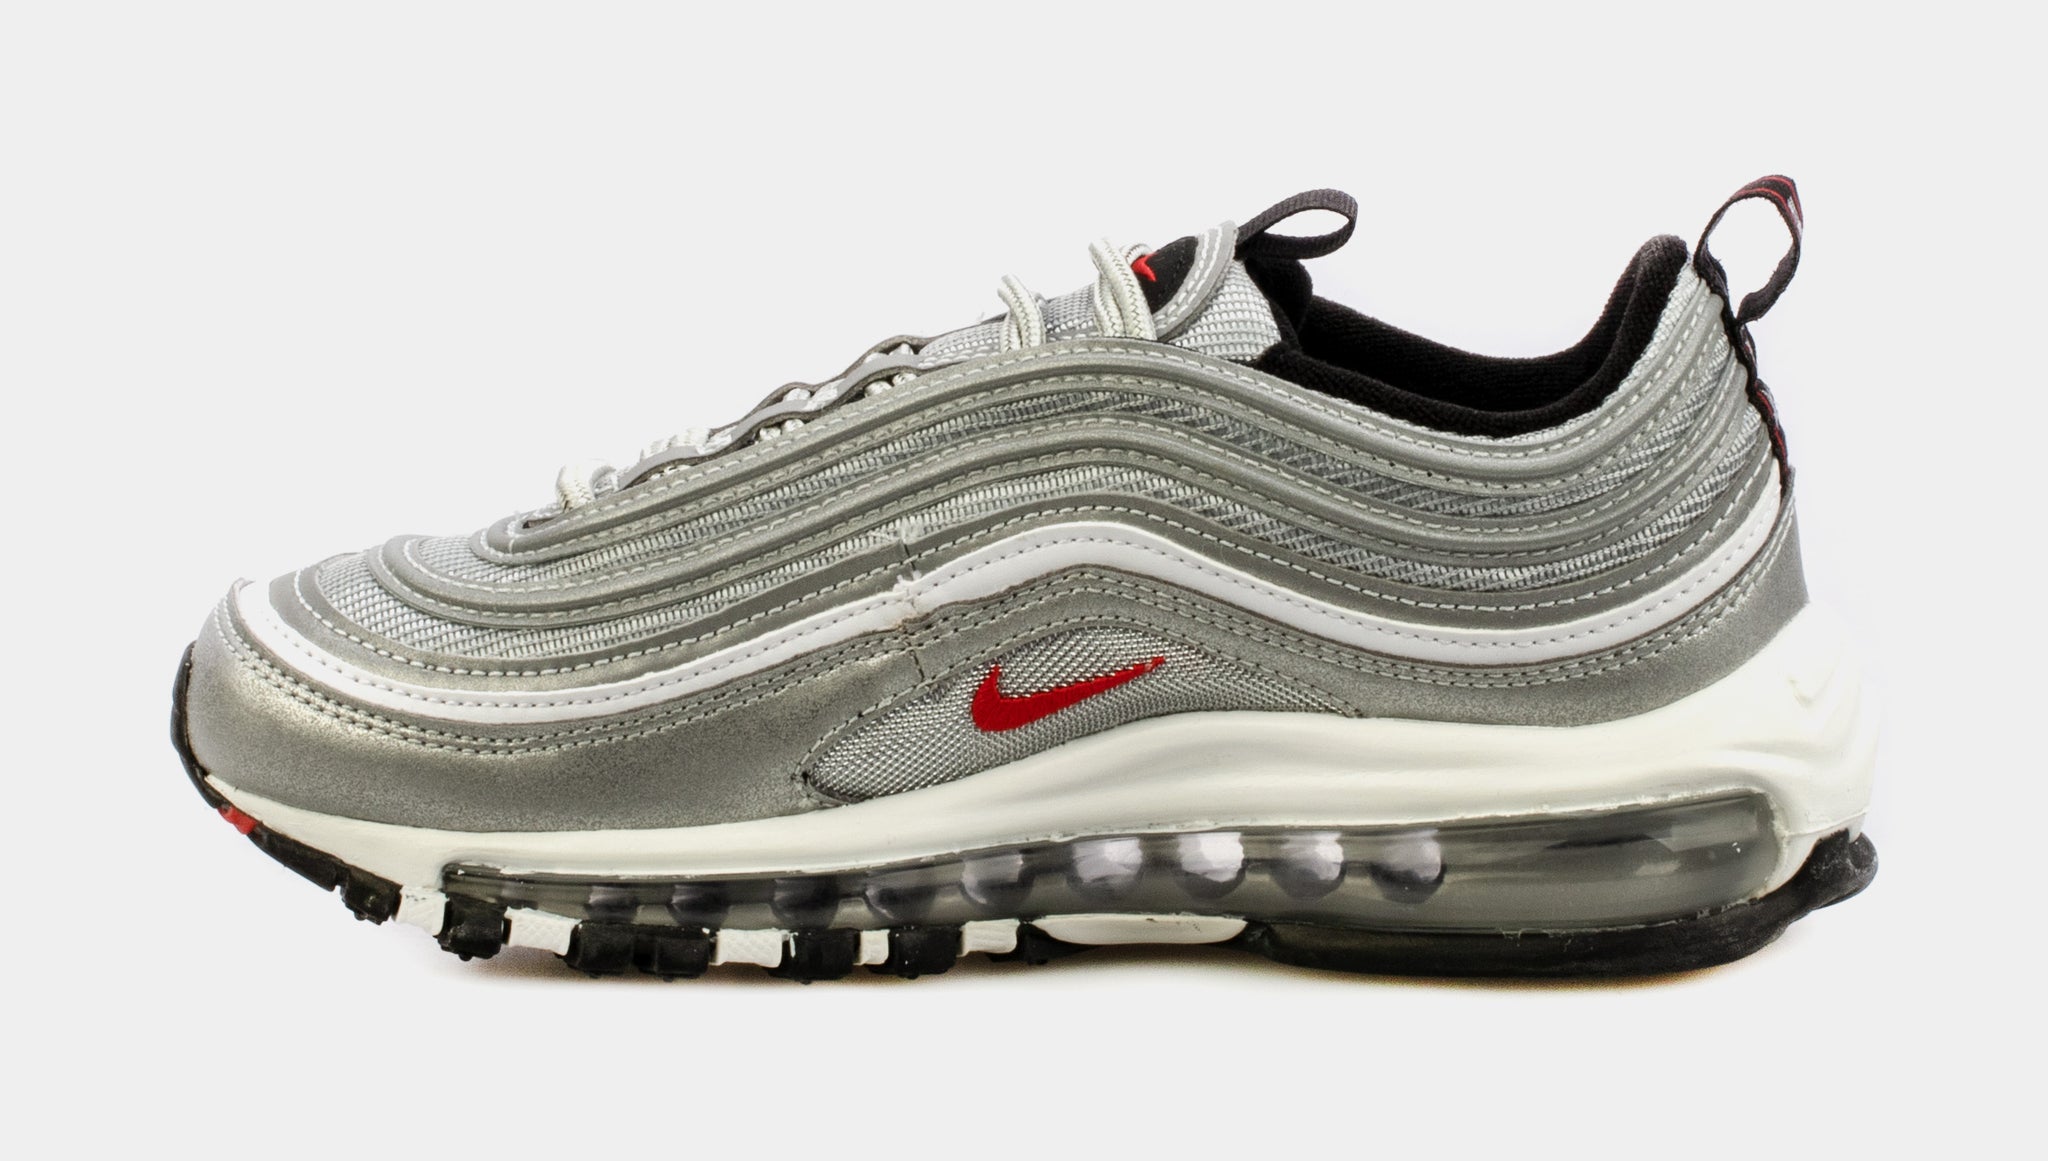 Nike Air Max 97 Bullet Womens Lifestyle Shoes Grey DQ9131-002 – Shoe Palace